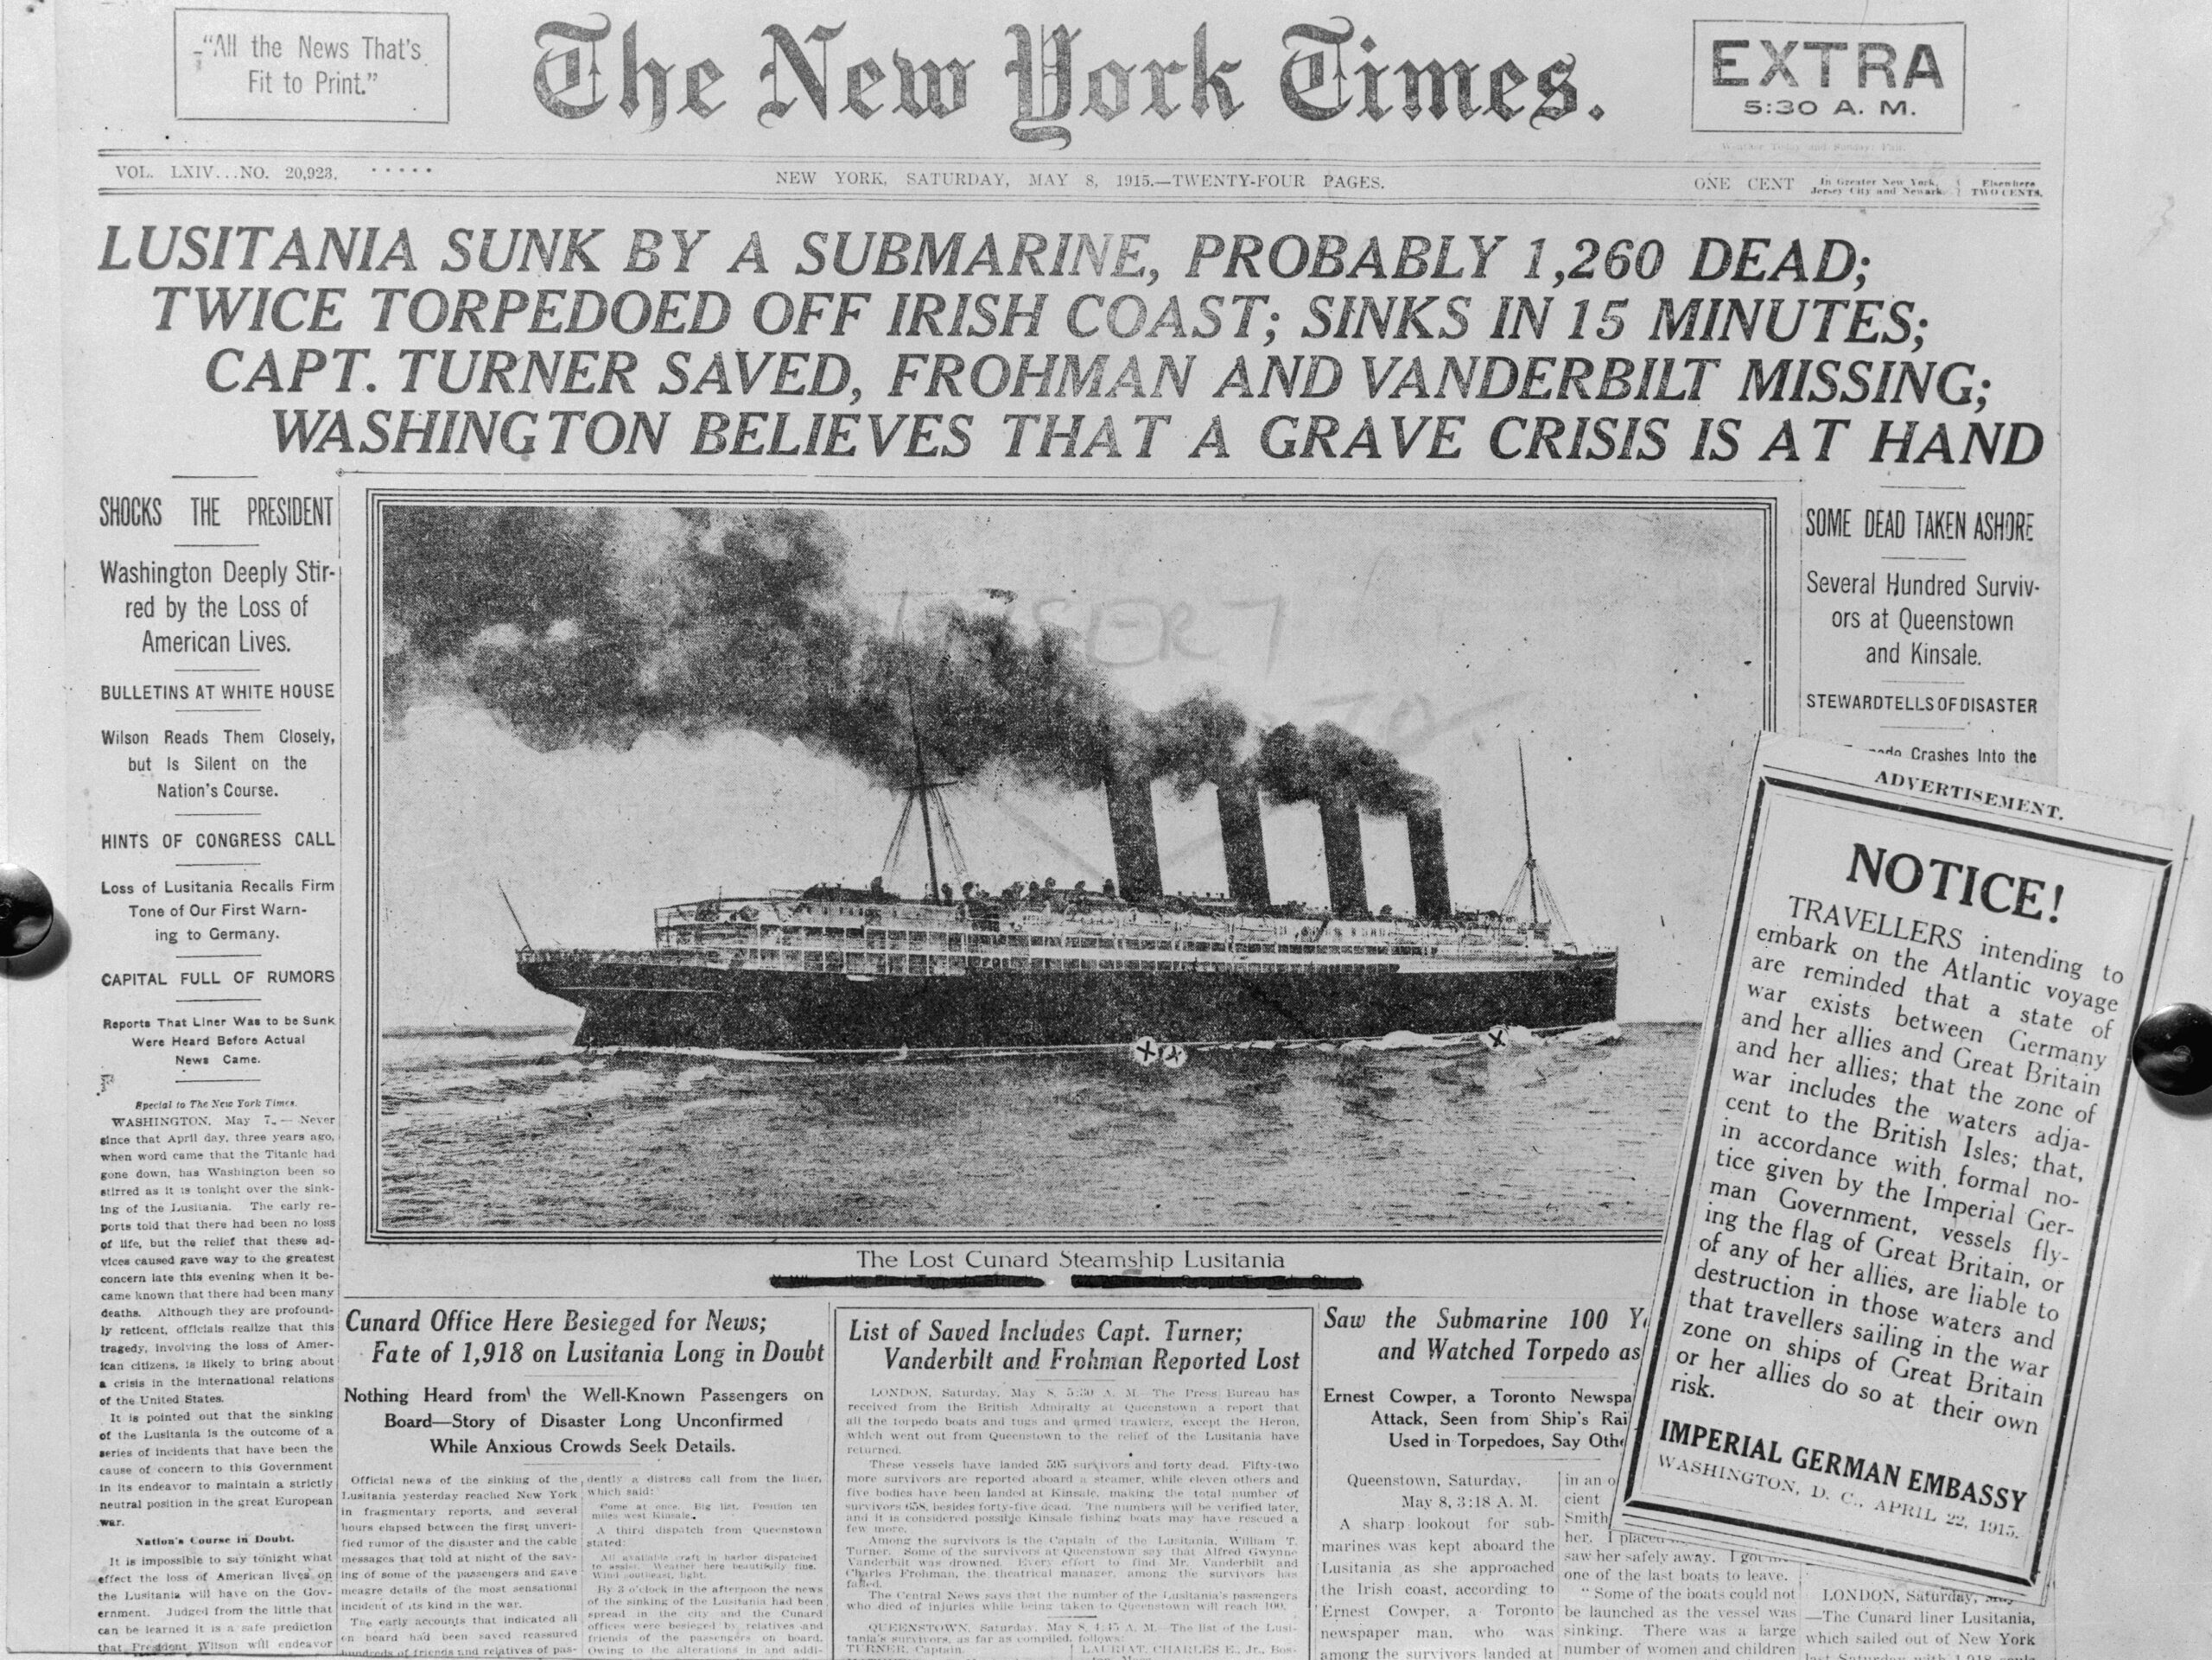 The front page of The New York Times after the sinking of the ocean liner Lusitania by a German submarine, along with a notice printed within from the German Embassy in the USA warning against trans-Atlantic travel. (Photo Credit: Getty Images)